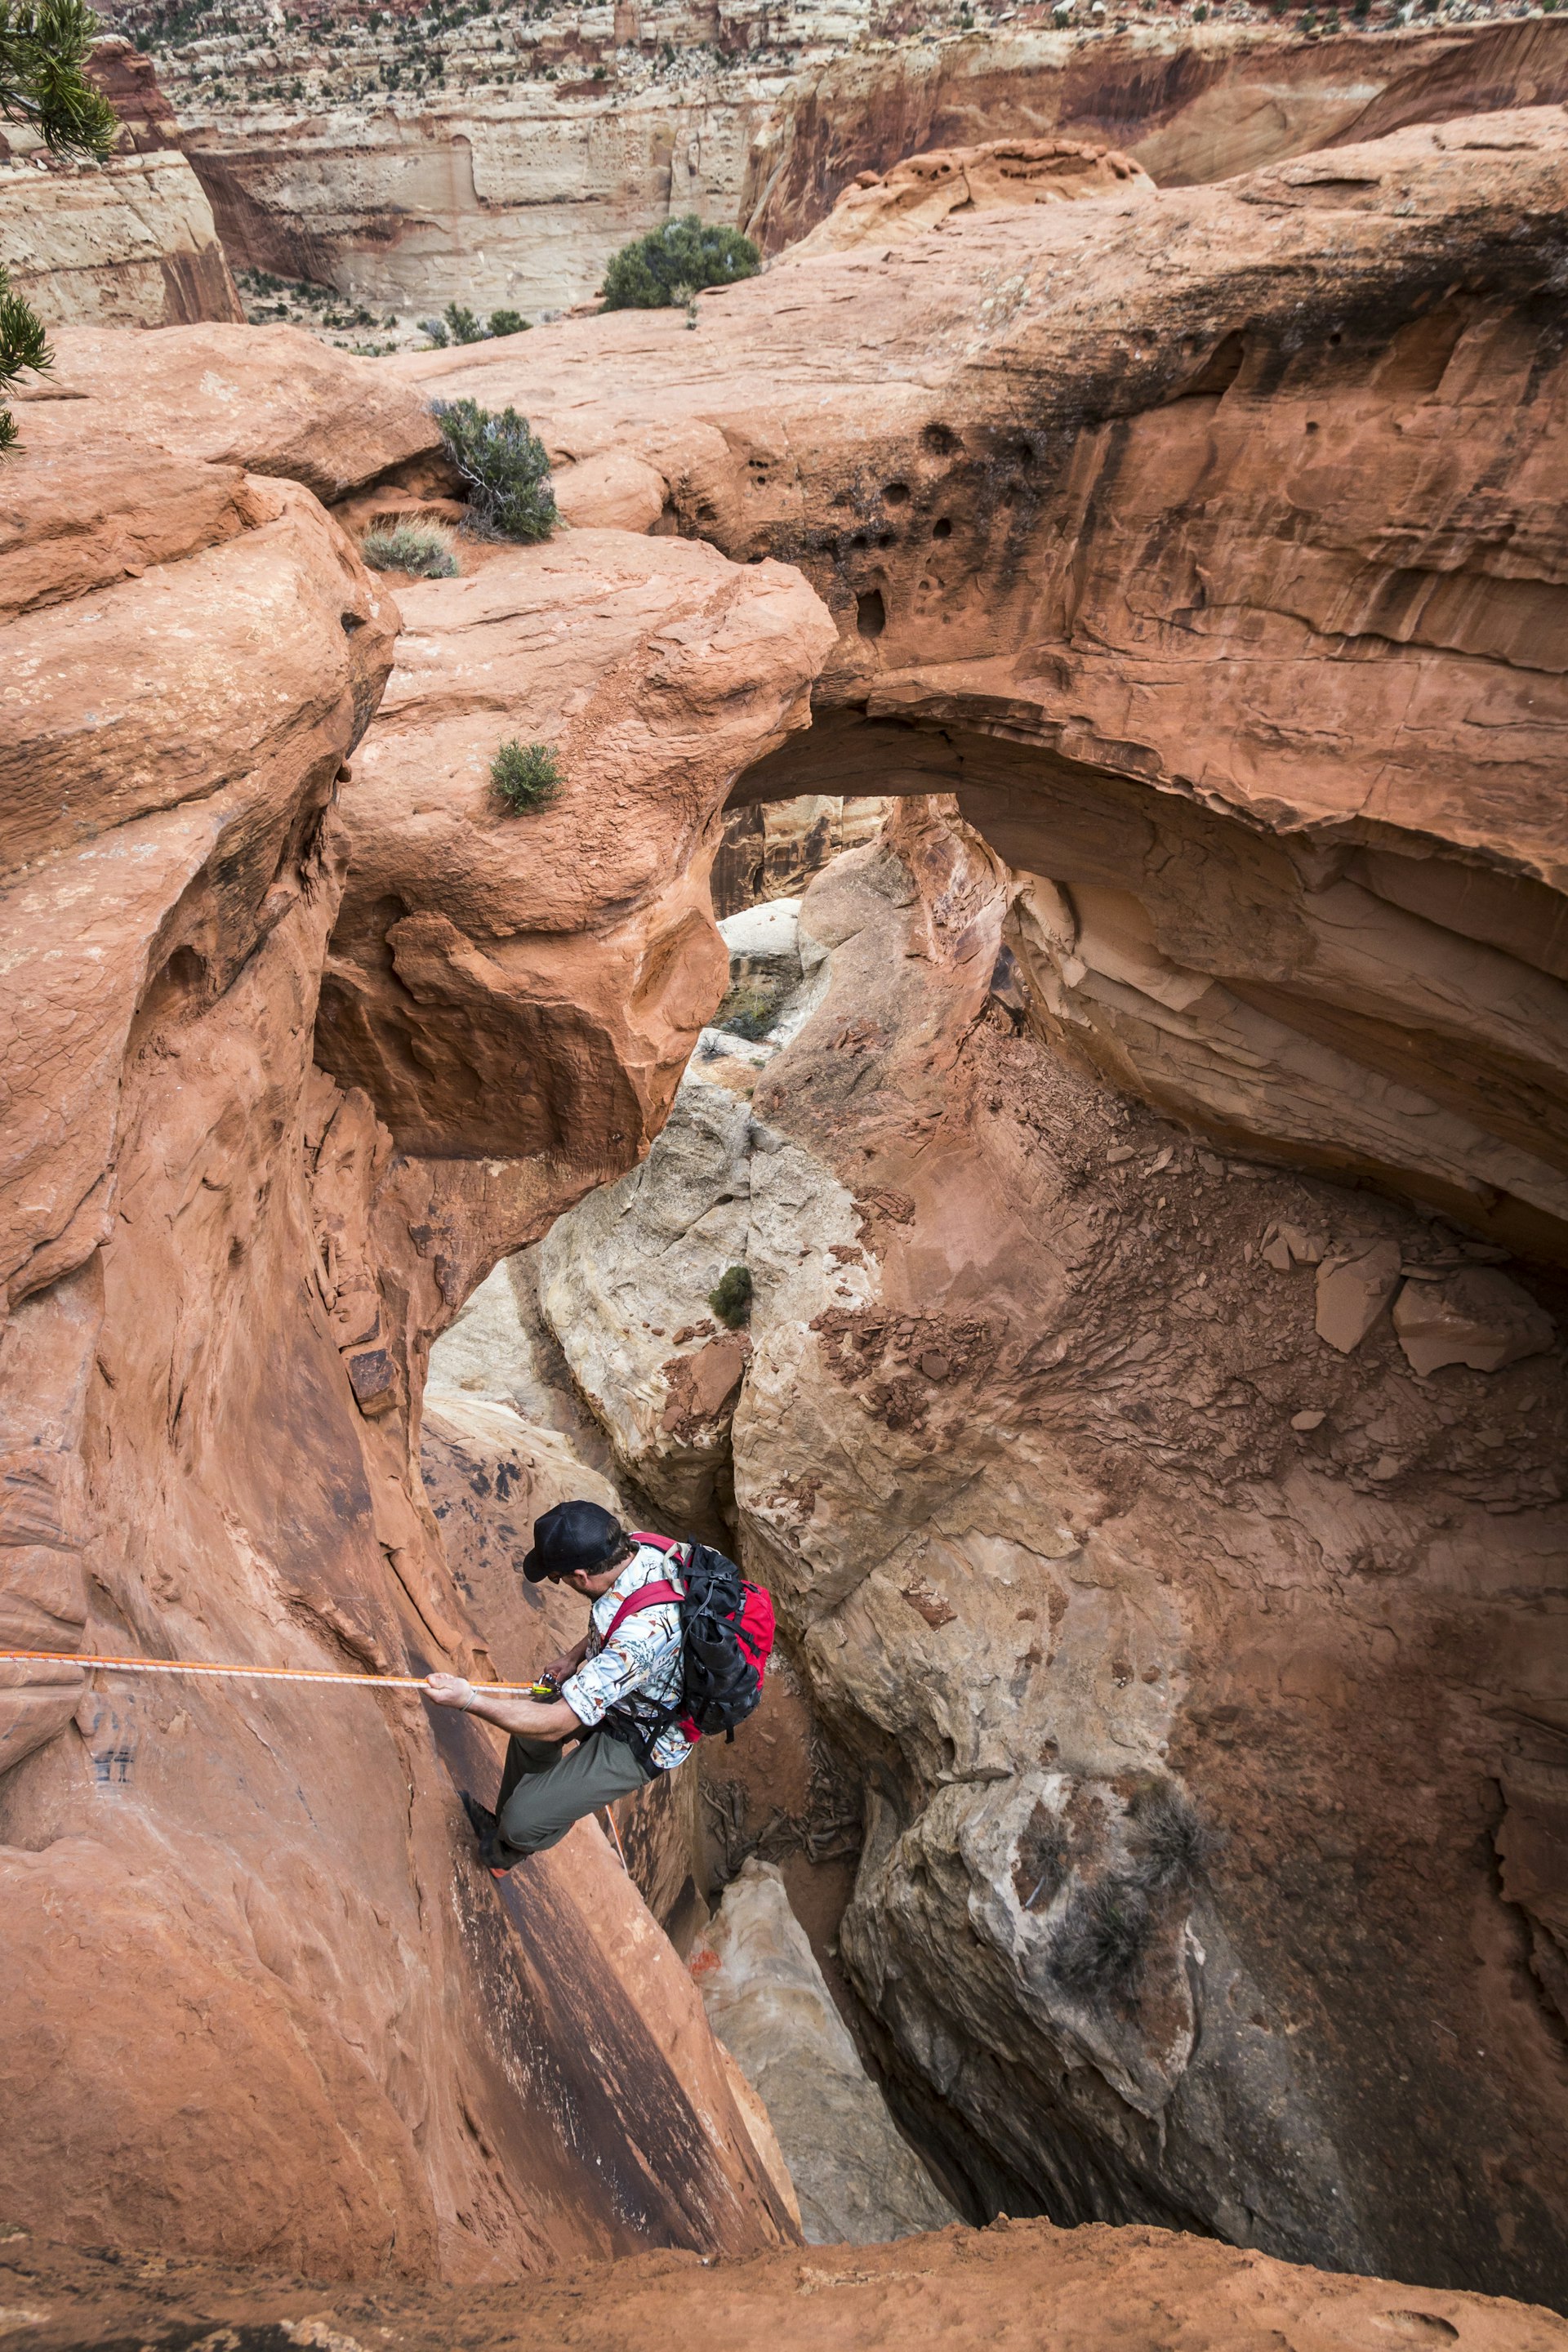 A man rappels down into a canyon below a natural rock arch in the desert